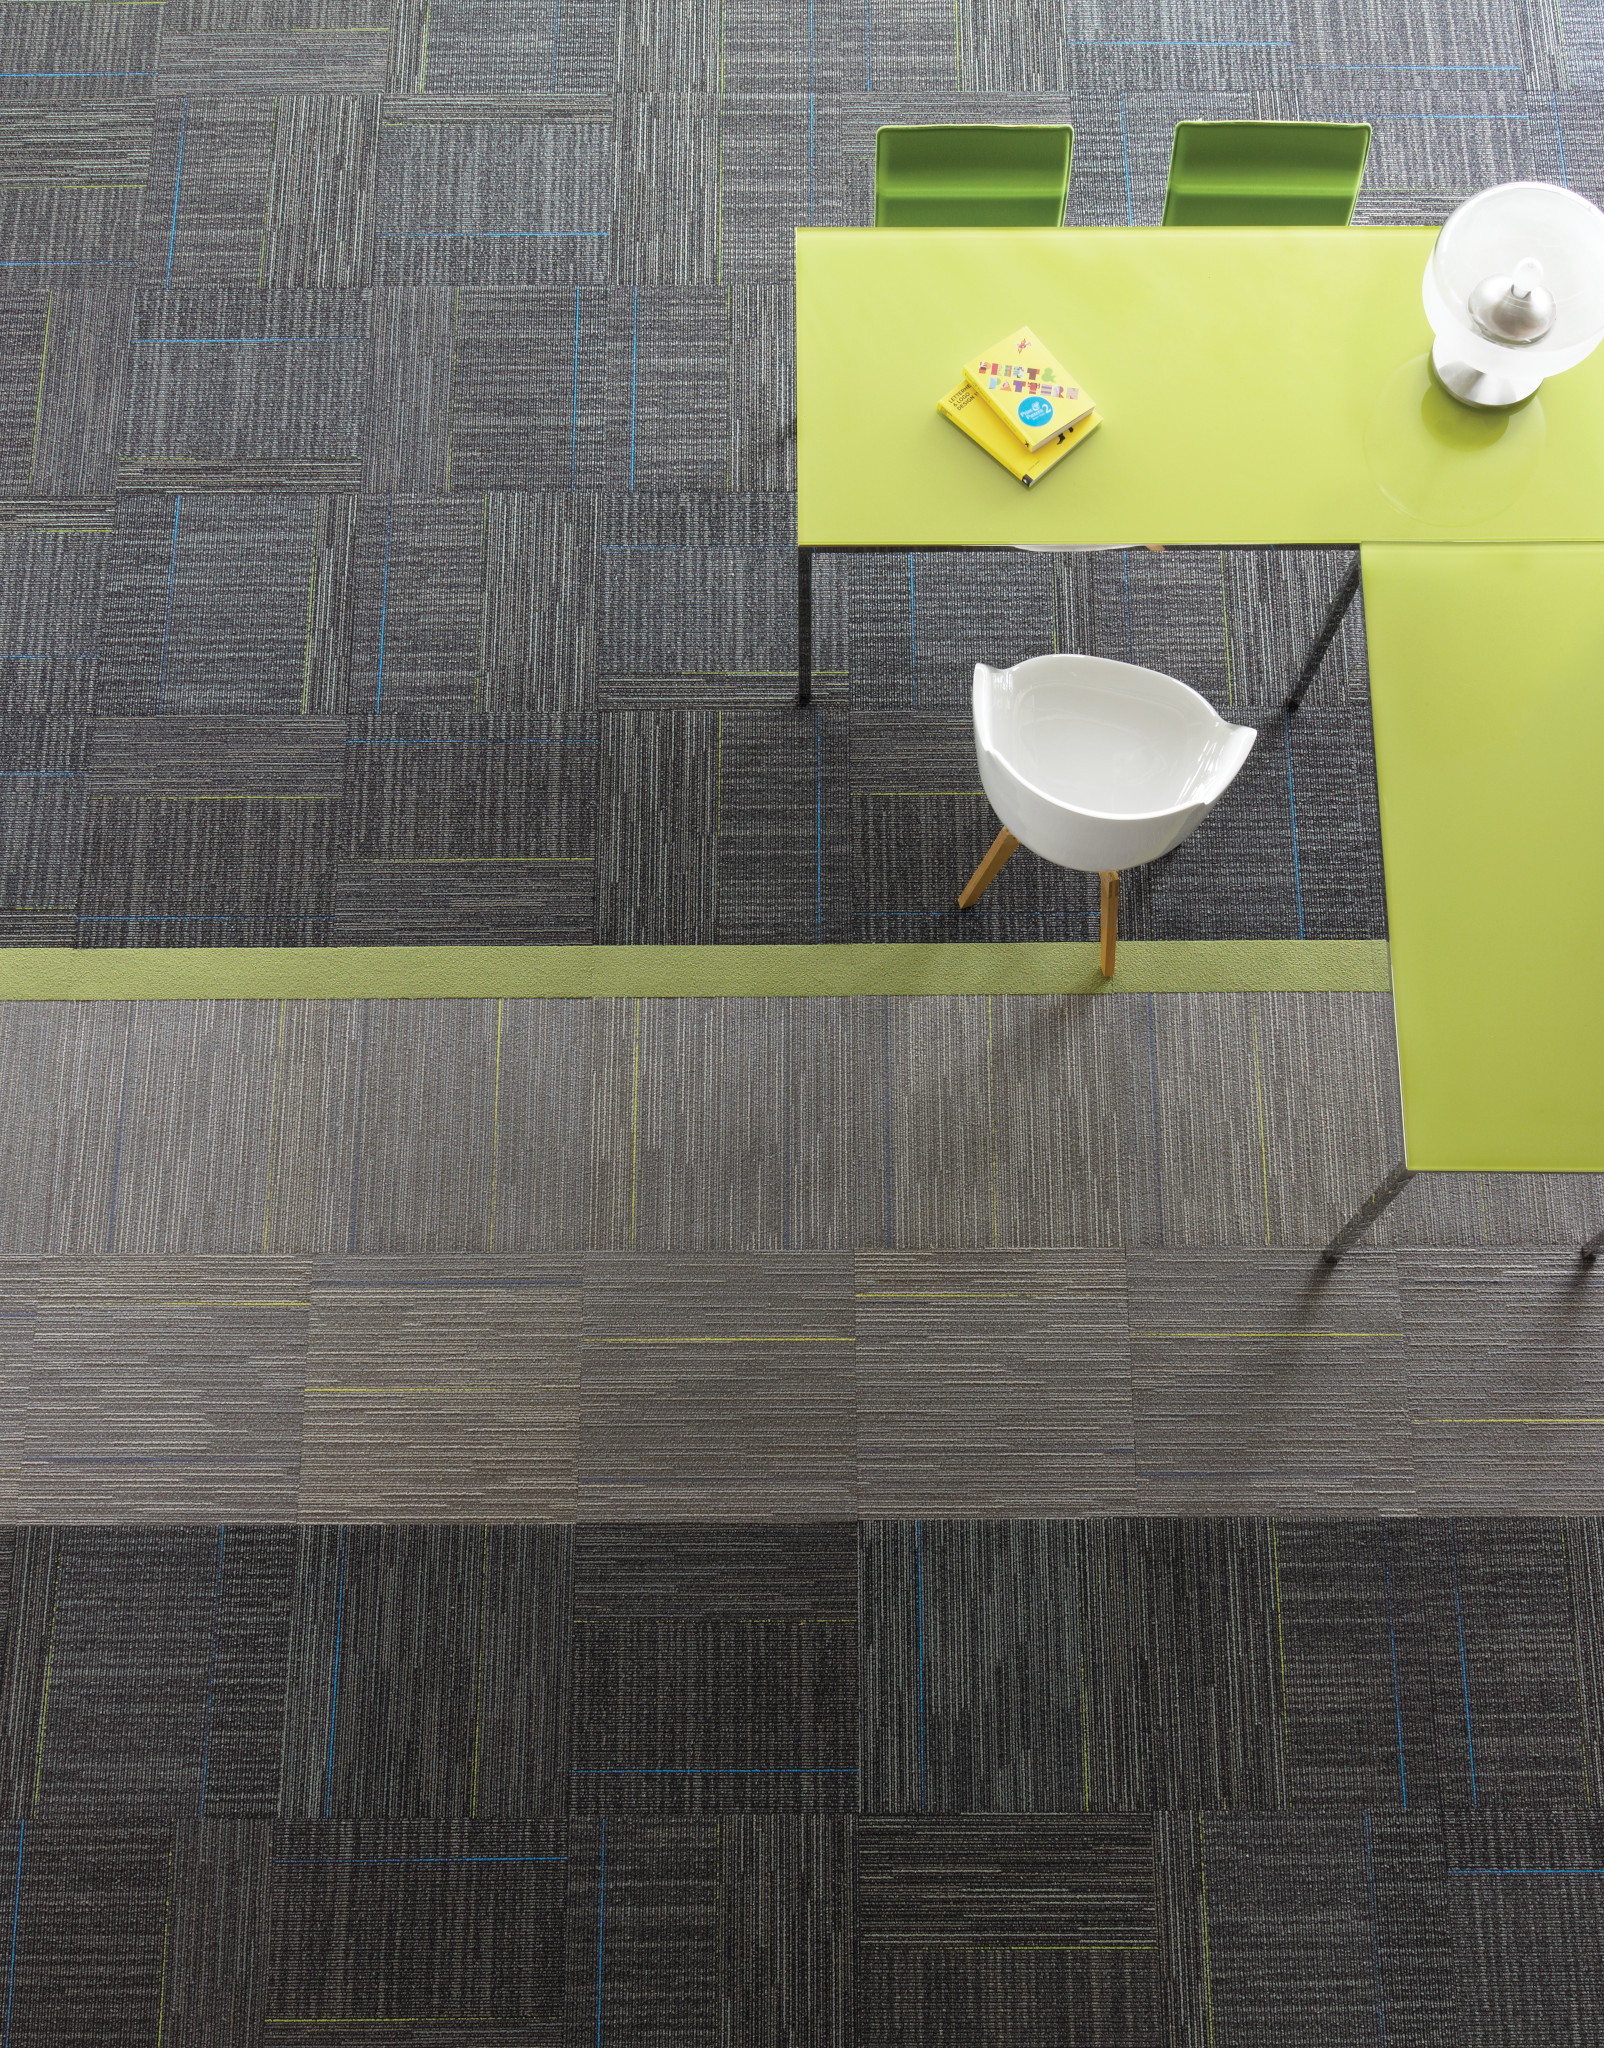 Infinite Tile 5t010 カーペットタイル Commercial Flooring Shawcontract